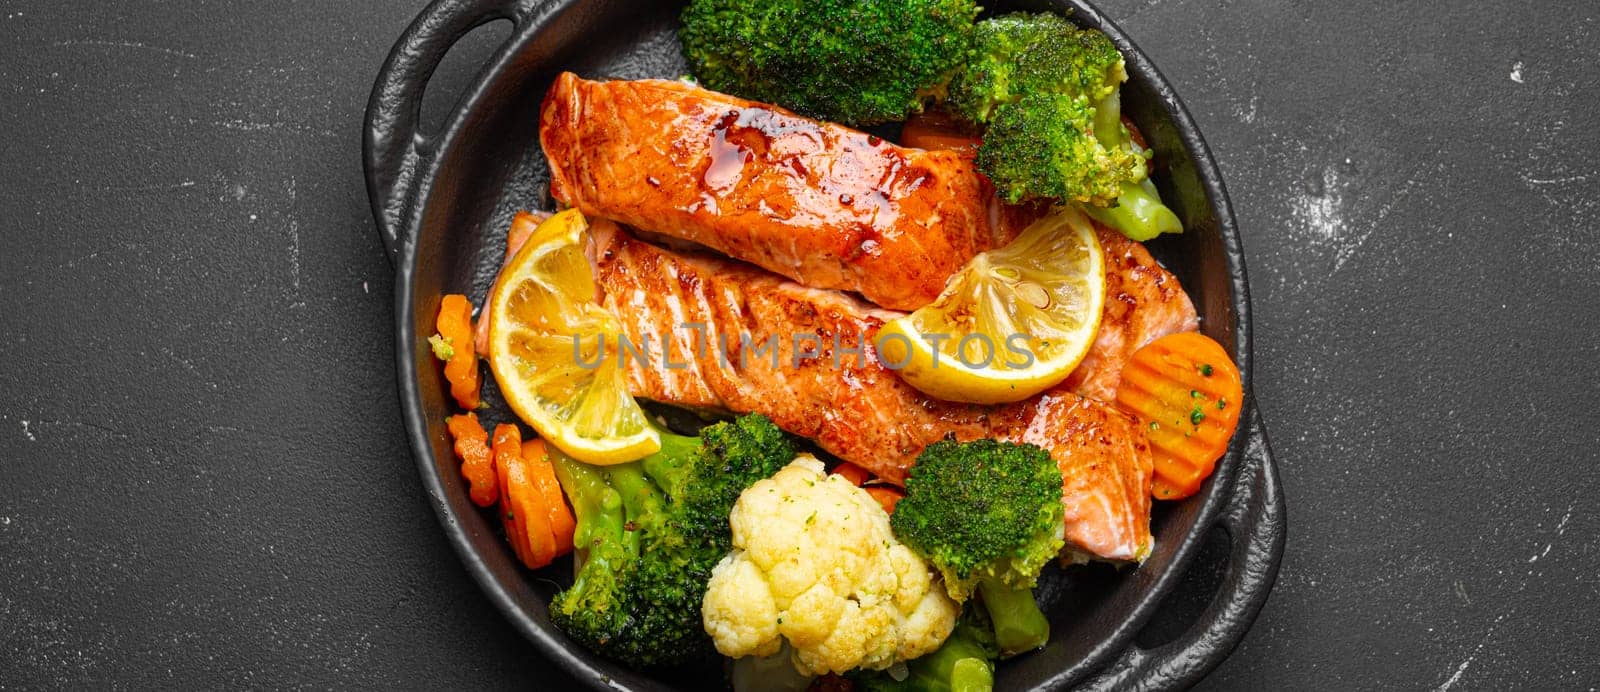 Healthy baked fish salmon steaks, broccoli, cauliflower, carrot in cast iron casserole bowl on black dark stone background. Cooking a delicious low carb dinner, healthy nutrition by its_al_dente